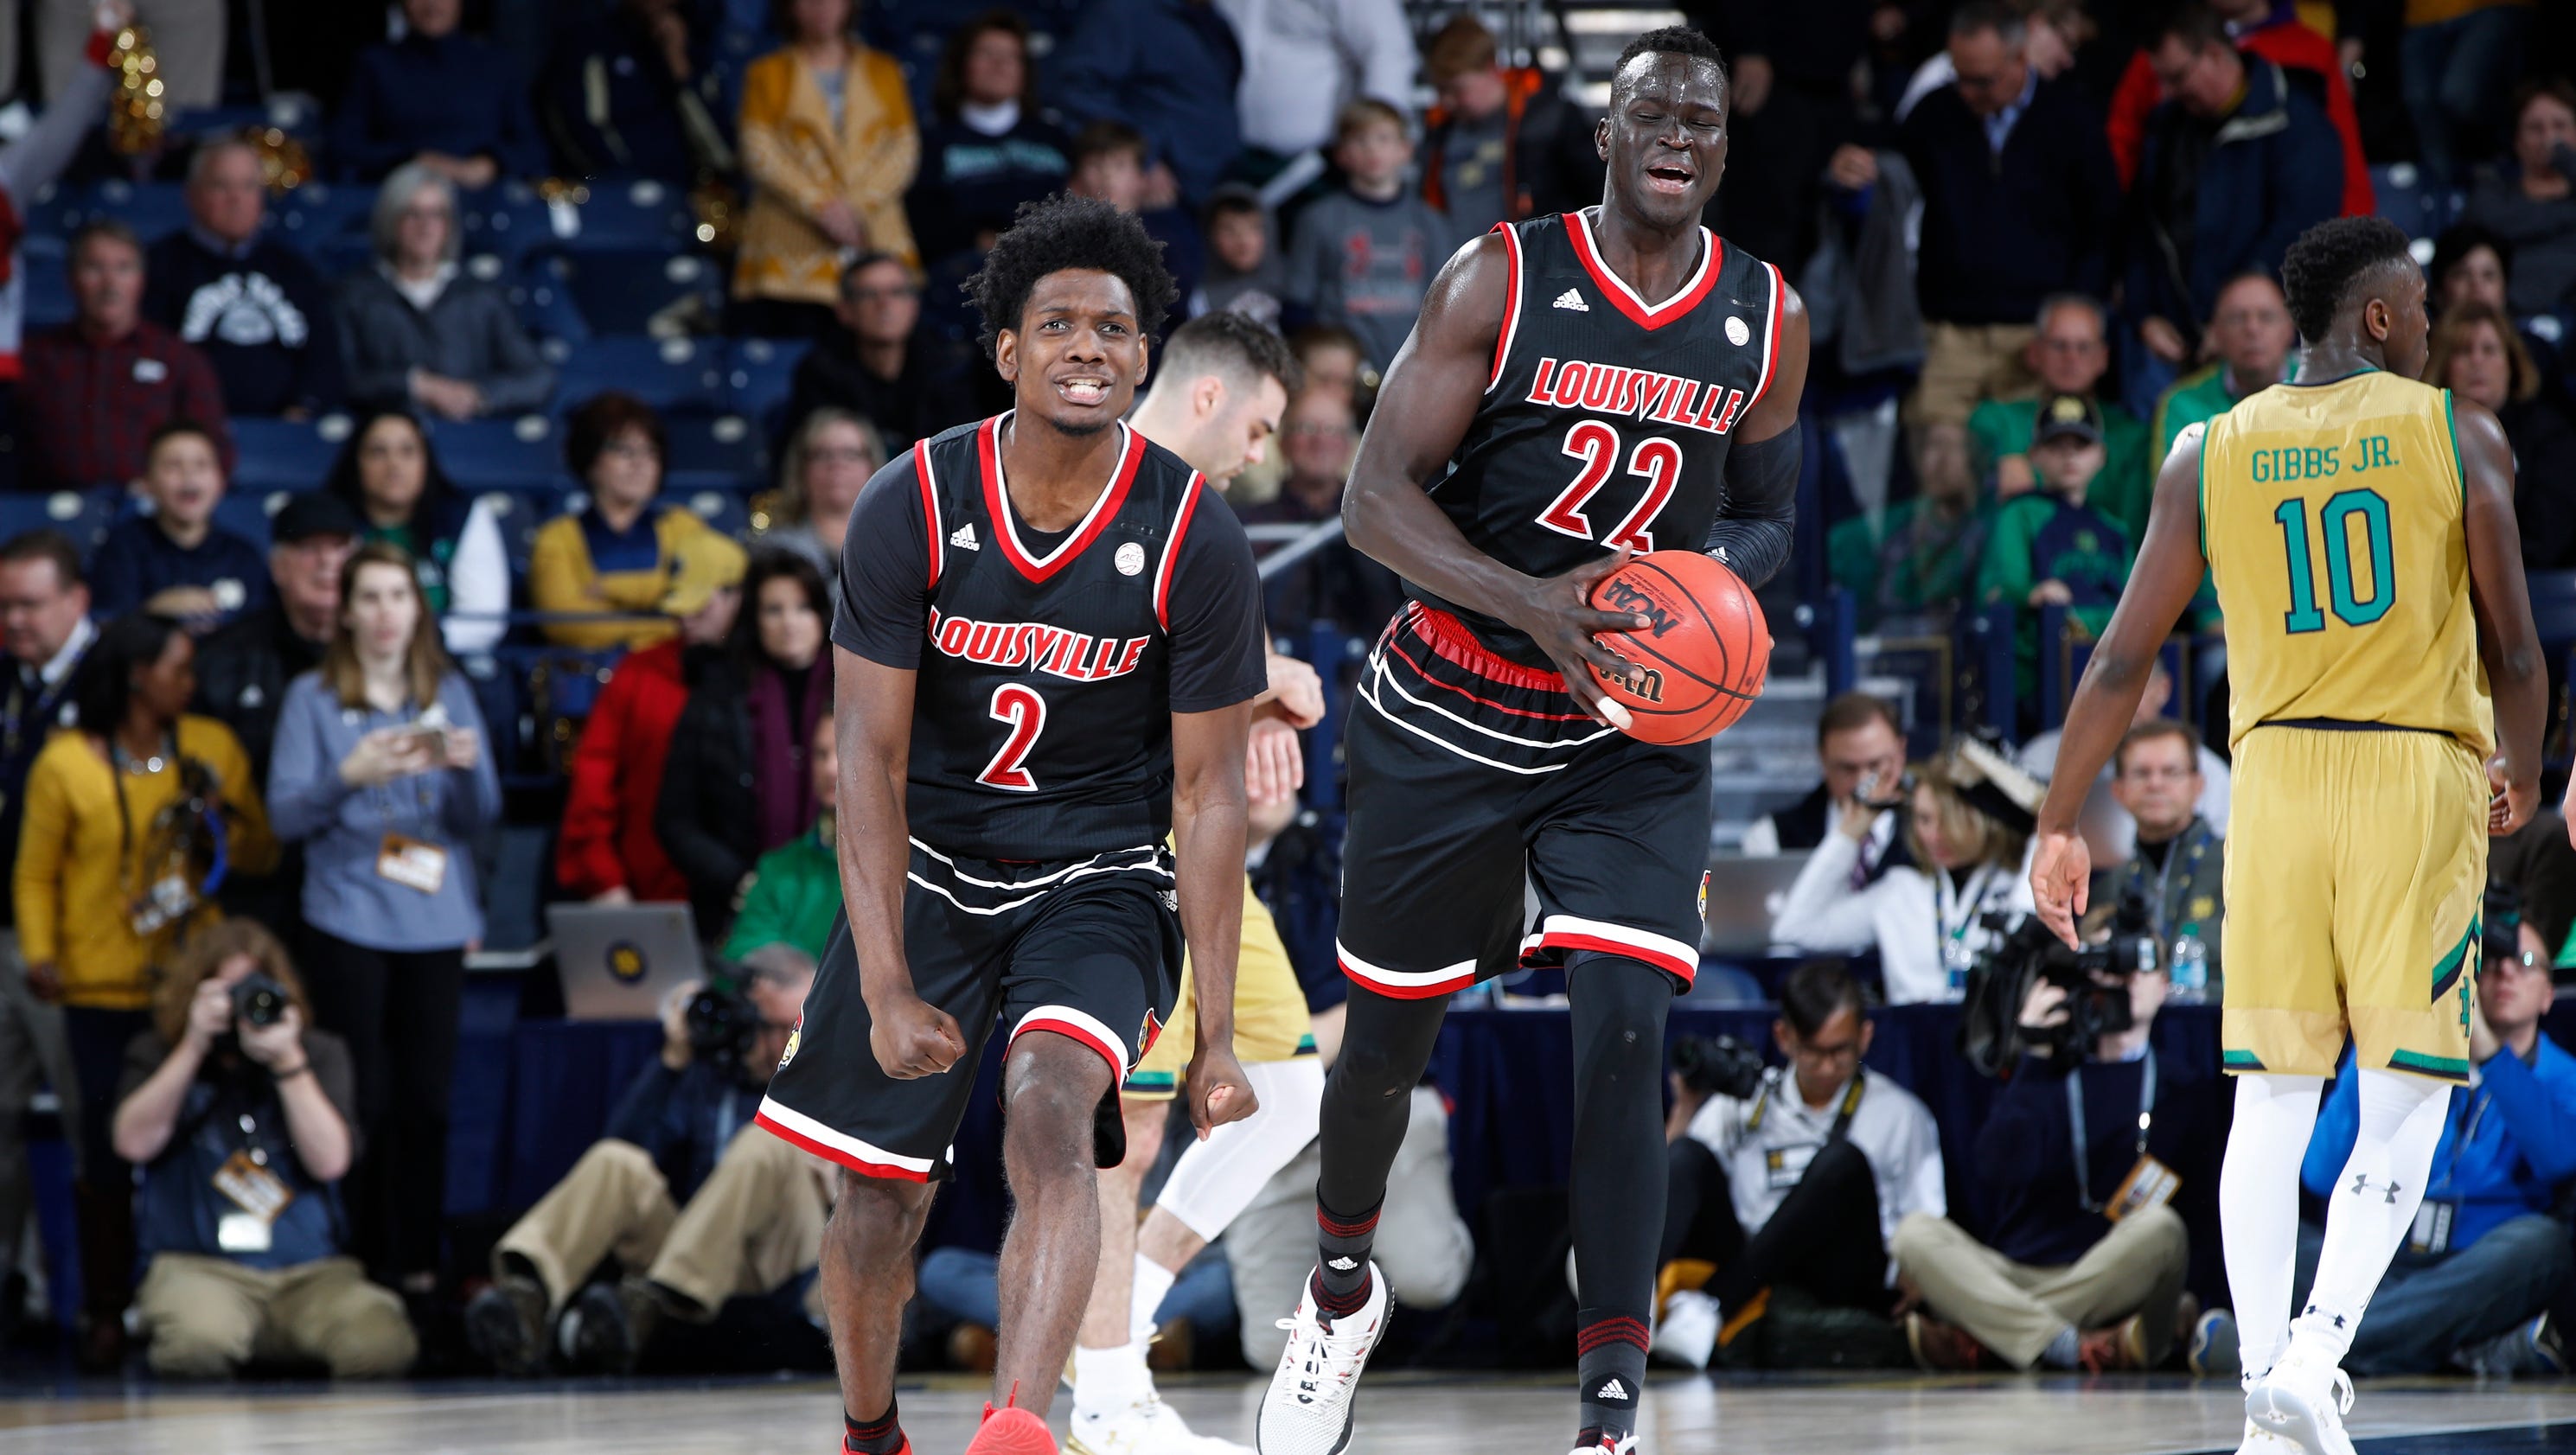 Louisville basketball, winners of three straight, playing like a different team